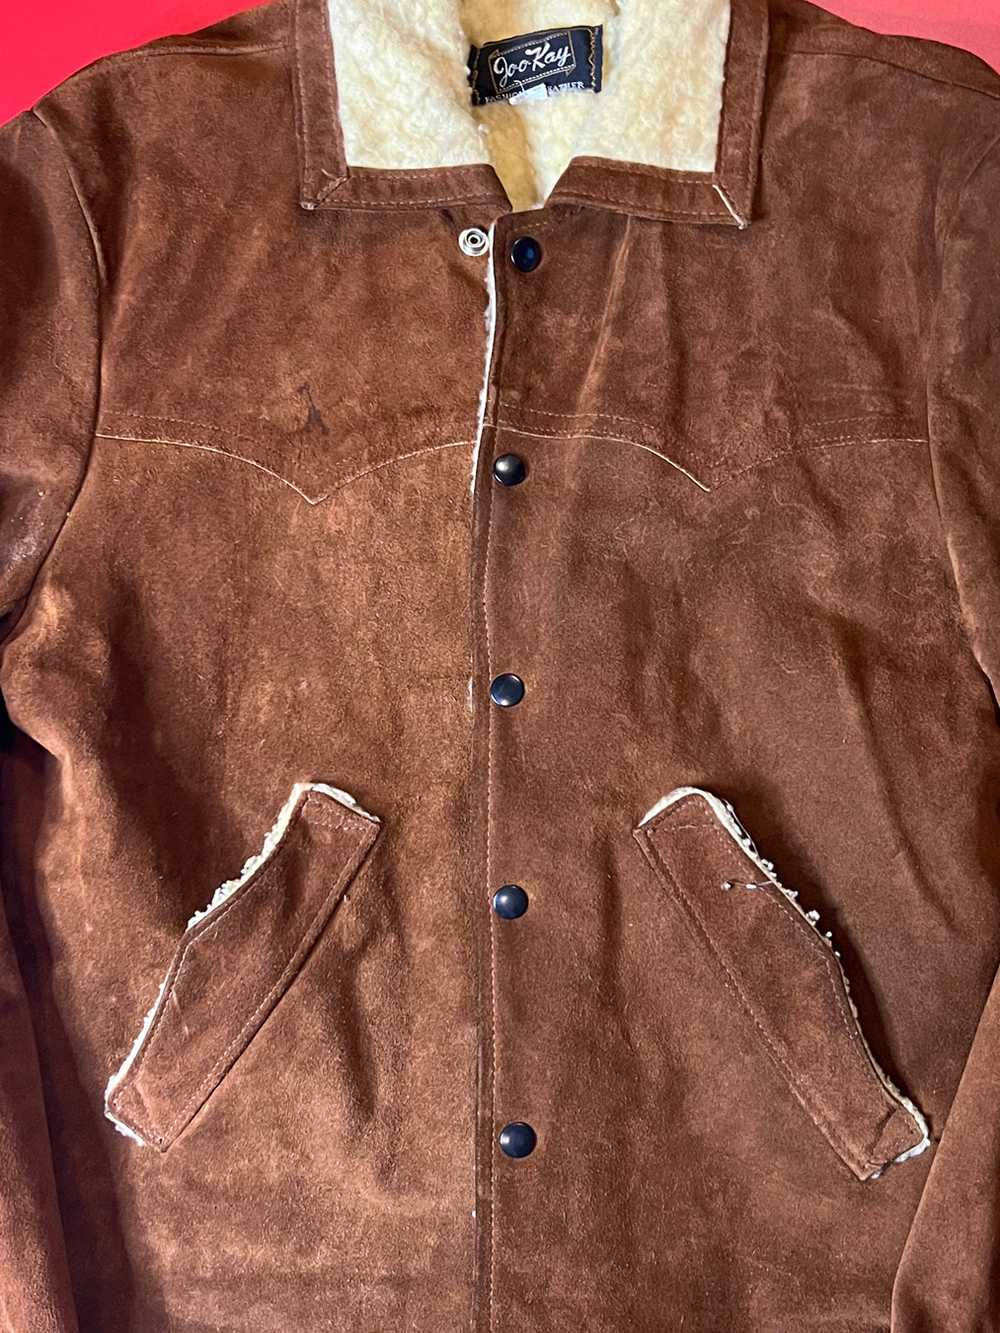 70’s Suede Sherpa - image 2